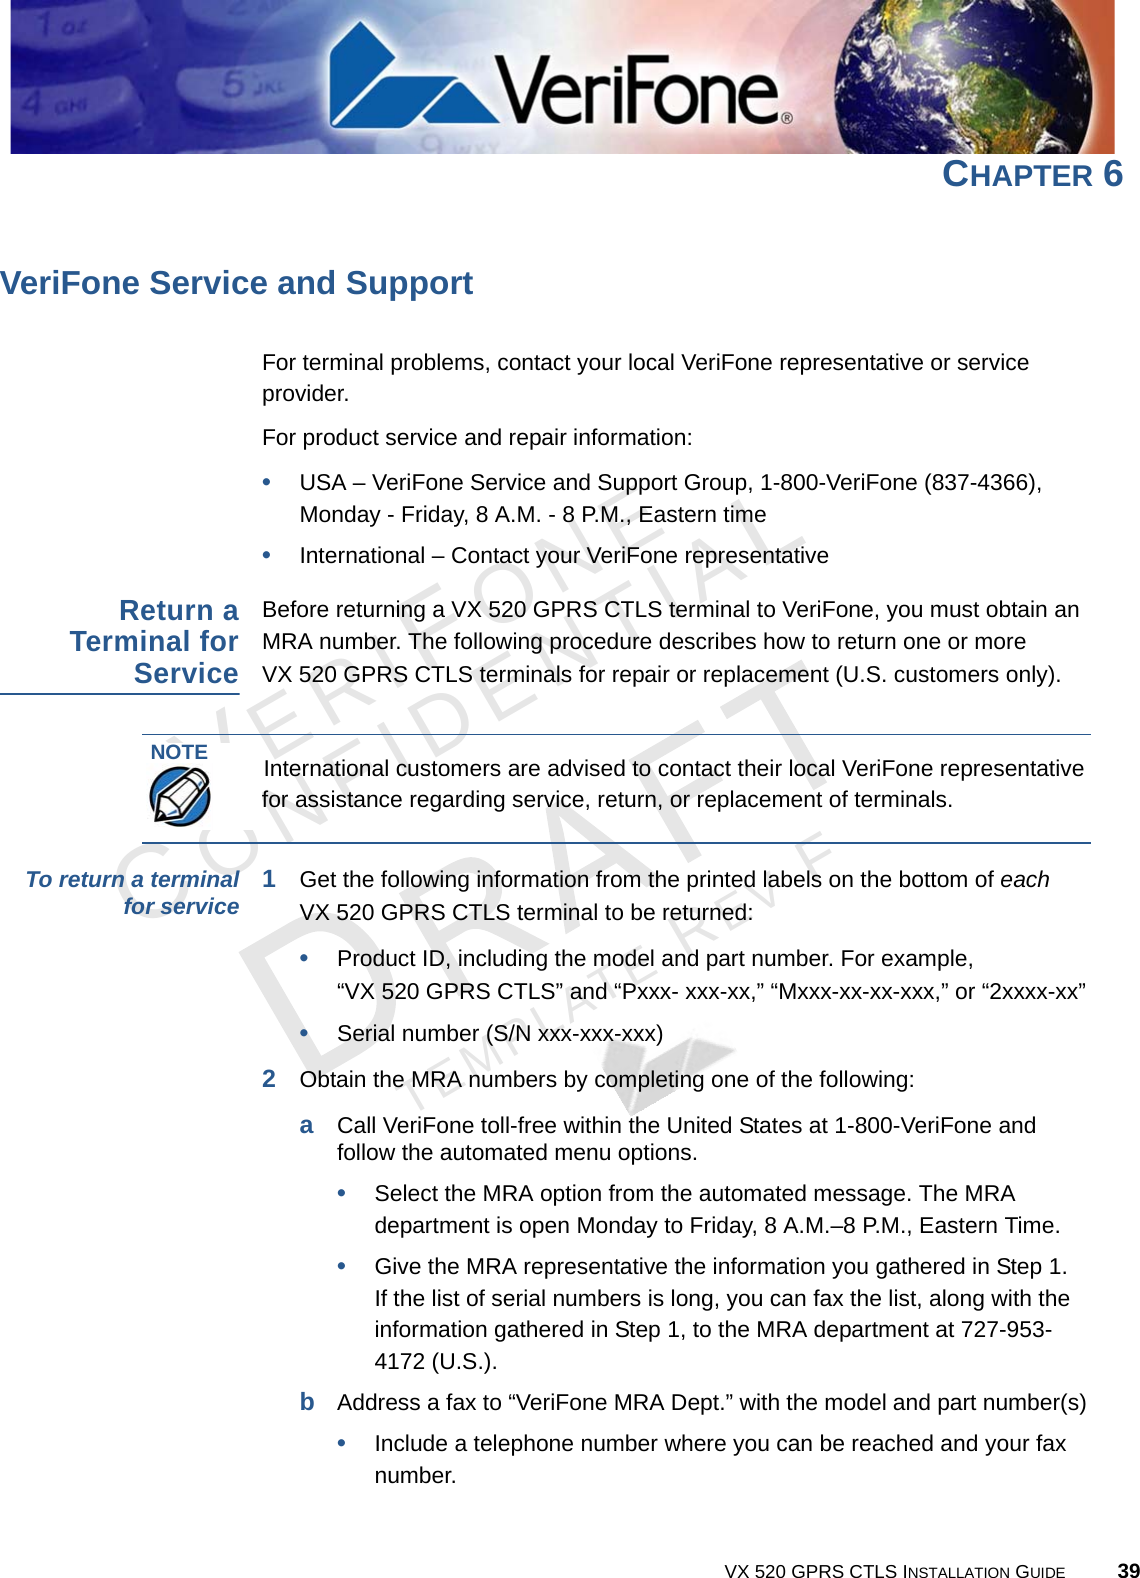 VERIFONECONFIDENTIALTEMPLATE REV F VX 520 GPRS CTLS INSTALLATION GUIDE 39CHAPTER 6VeriFone Service and SupportFor terminal problems, contact your local VeriFone representative or service provider. For product service and repair information:•USA – VeriFone Service and Support Group, 1-800-VeriFone (837-4366), Monday - Friday, 8 A.M. - 8 P.M., Eastern time•International – Contact your VeriFone representative Return aTerminal forServiceBefore returning a VX 520 GPRS CTLS terminal to VeriFone, you must obtain an MRA number. The following procedure describes how to return one or more VX 520 GPRS CTLS terminals for repair or replacement (U.S. customers only). To return a terminalfor service 1Get the following information from the printed labels on the bottom of each VX 520 GPRS CTLS terminal to be returned:•Product ID, including the model and part number. For example, “VX 520 GPRS CTLS” and “Pxxx- xxx-xx,” “Mxxx-xx-xx-xxx,” or “2xxxx-xx”•Serial number (S/N xxx-xxx-xxx)2Obtain the MRA numbers by completing one of the following:aCall VeriFone toll-free within the United States at 1-800-VeriFone and follow the automated menu options.•Select the MRA option from the automated message. The MRA department is open Monday to Friday, 8 A.M.–8 P.M., Eastern Time.•Give the MRA representative the information you gathered in Step 1.If the list of serial numbers is long, you can fax the list, along with the information gathered in Step 1, to the MRA department at 727-953-4172 (U.S.).bAddress a fax to “VeriFone MRA Dept.” with the model and part number(s)•Include a telephone number where you can be reached and your fax number.NOTEInternational customers are advised to contact their local VeriFone representative for assistance regarding service, return, or replacement of terminals.